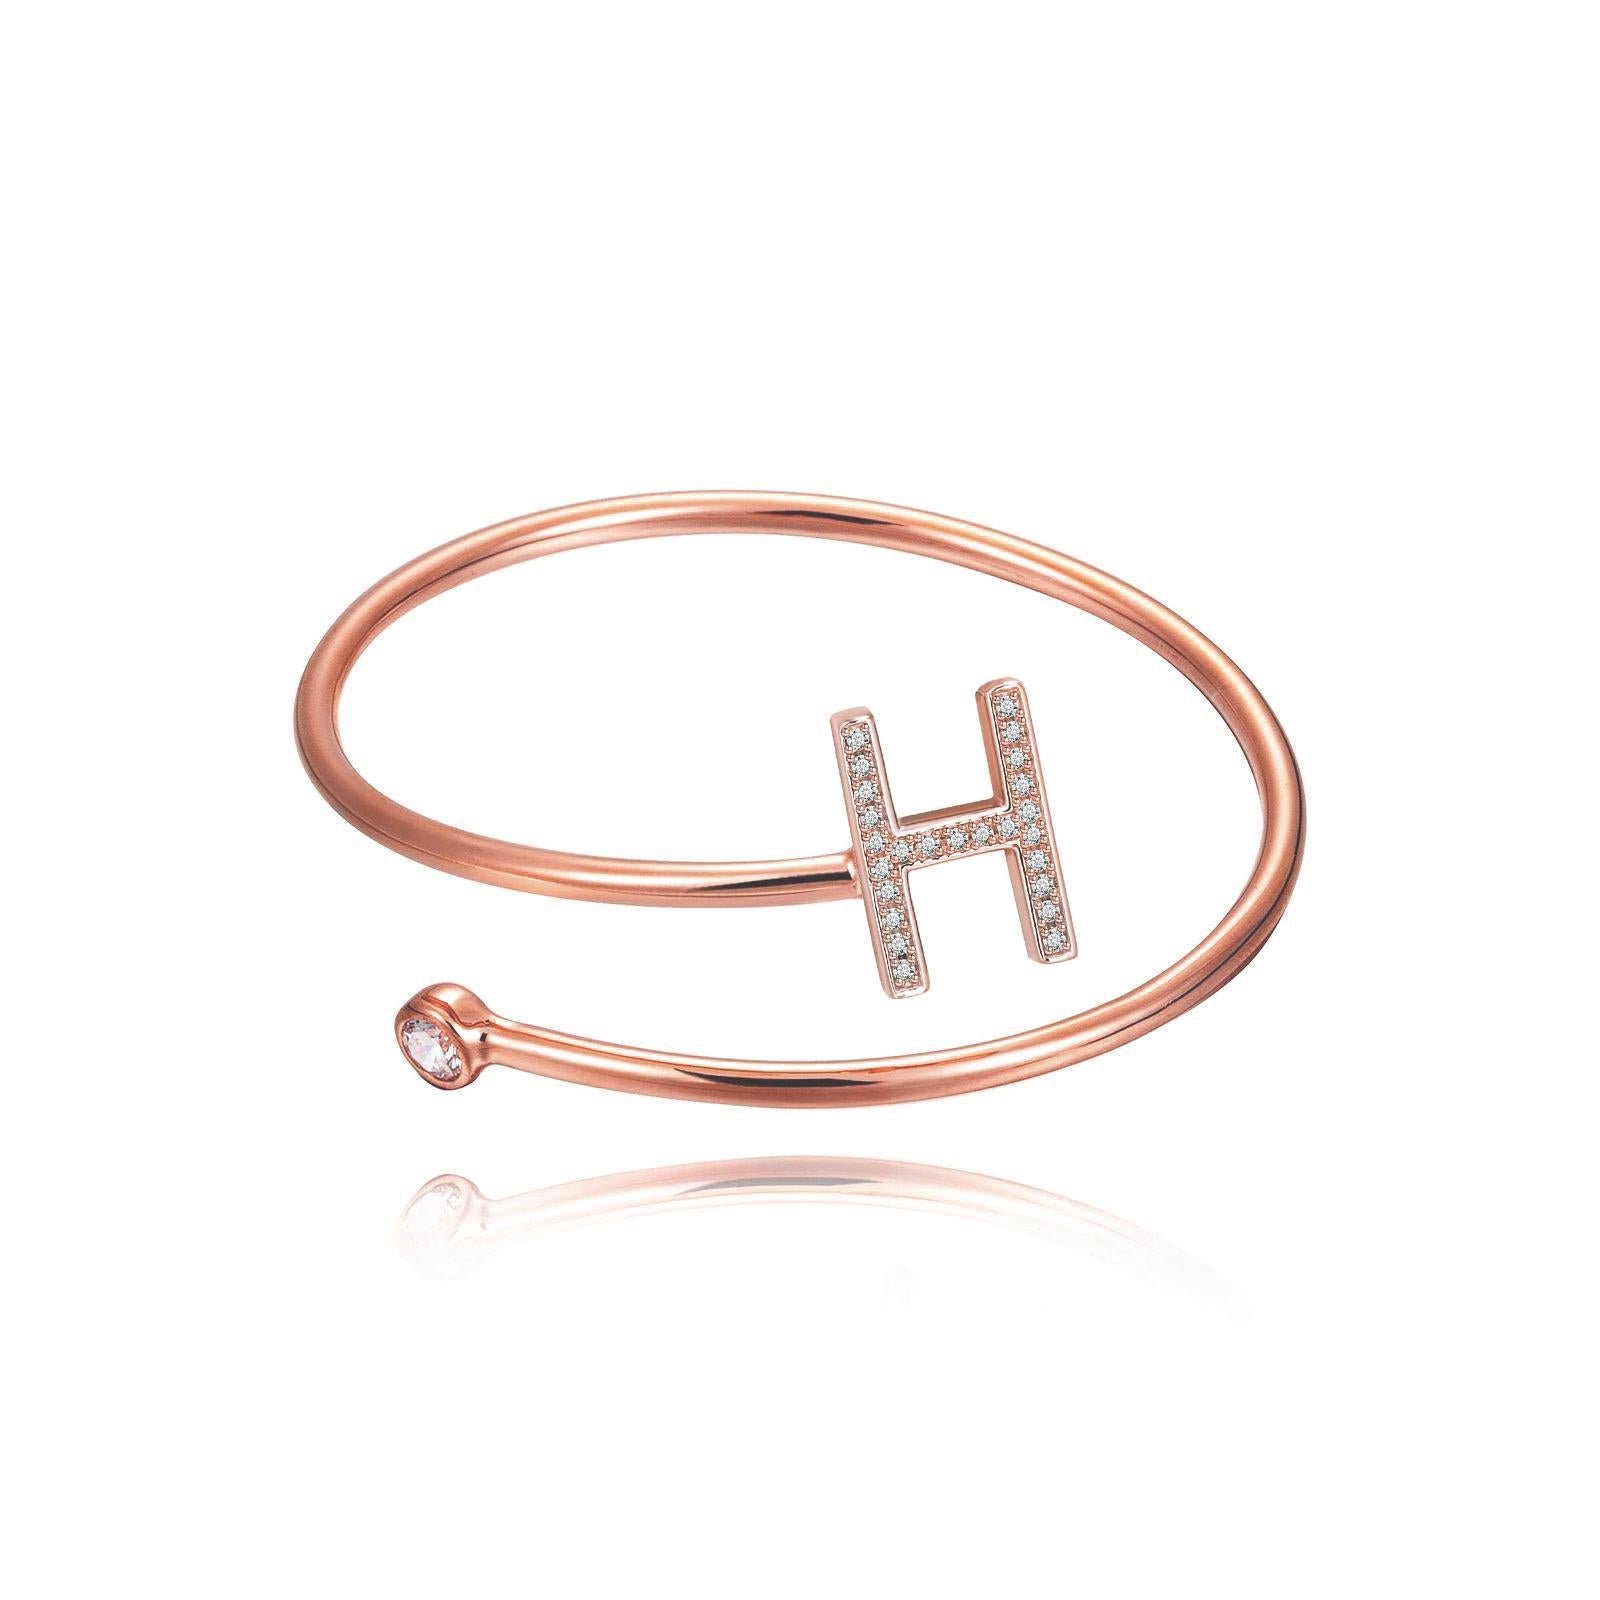 Nothing says YOU more than YOU. You are unique. You are bold.  You're not afraid to share who you are.  This initial wire bezel cuff is elegantly slimline while sharing a little bit about yourself with others. .925 sterling silver base also